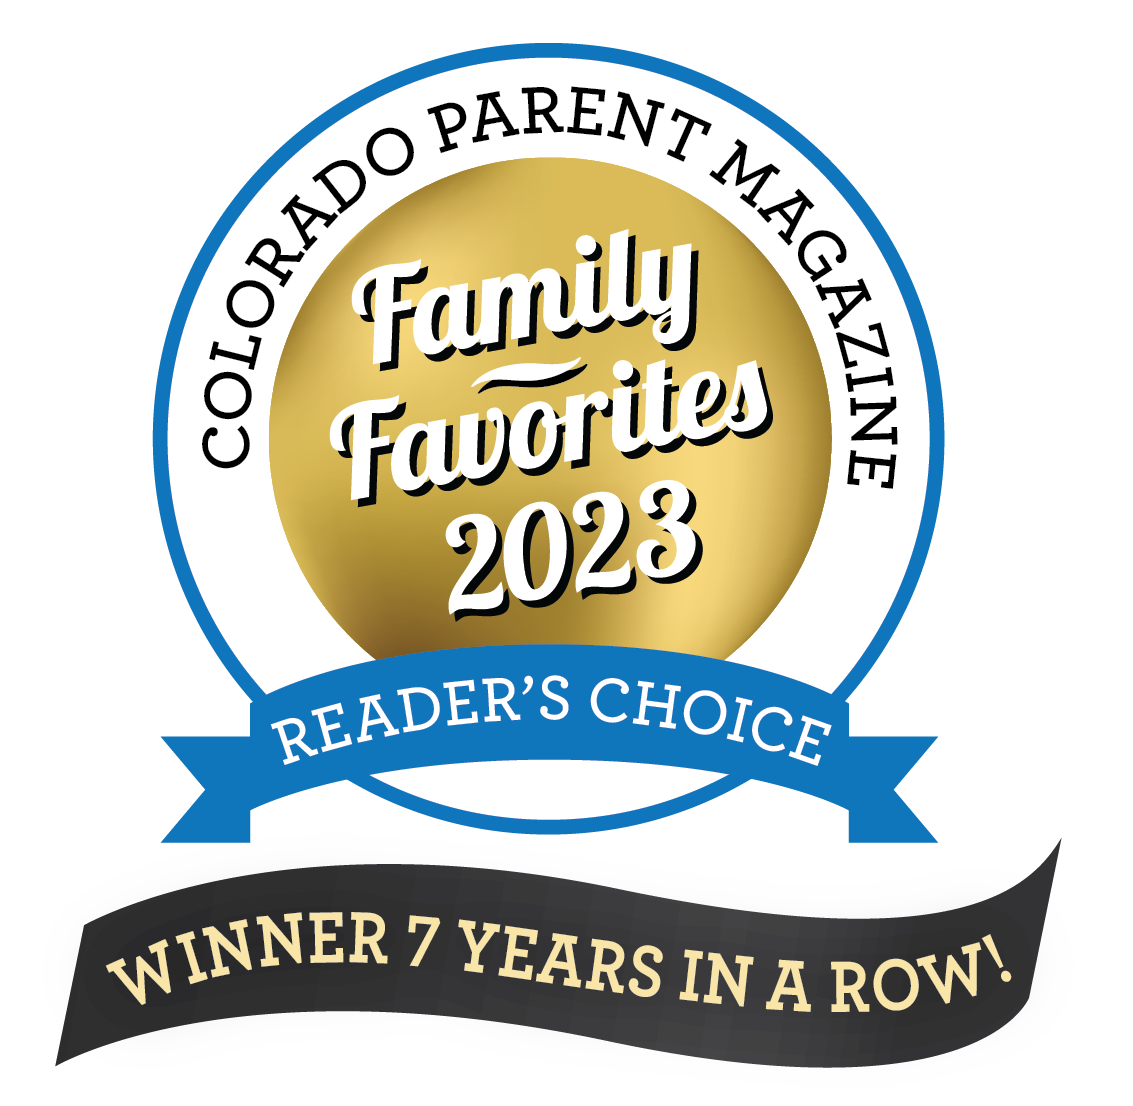 Colorado Parent Magazine - Family Favorites 2023 Reader's Choice - Winner 7 Years in a Row!